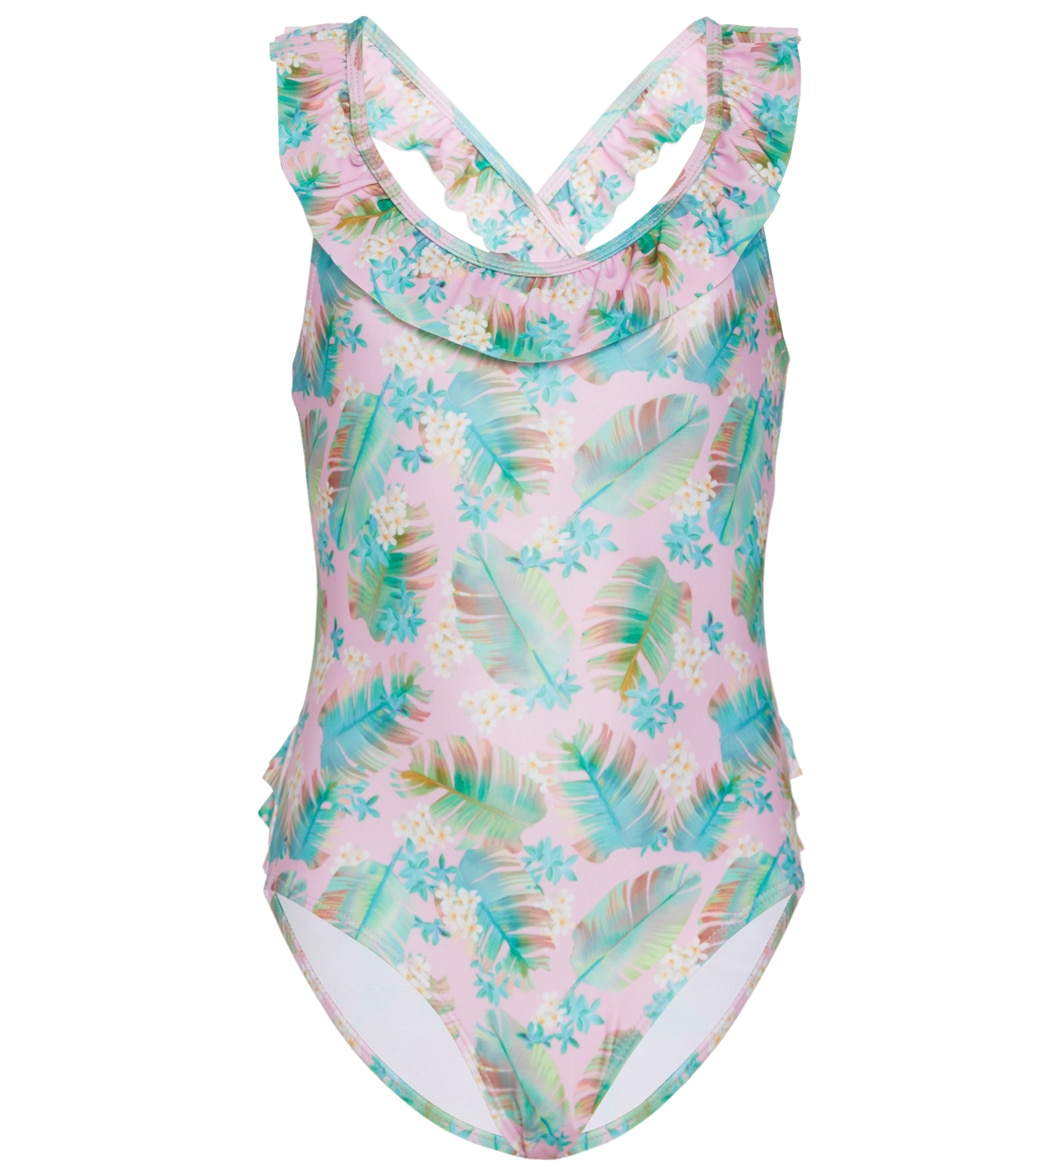 Flap Happy Girls' Luau Palms Mindy Upf 50+ One Piece Swimsuit Baby Toddler - 12 Months - Swimoutlet.com